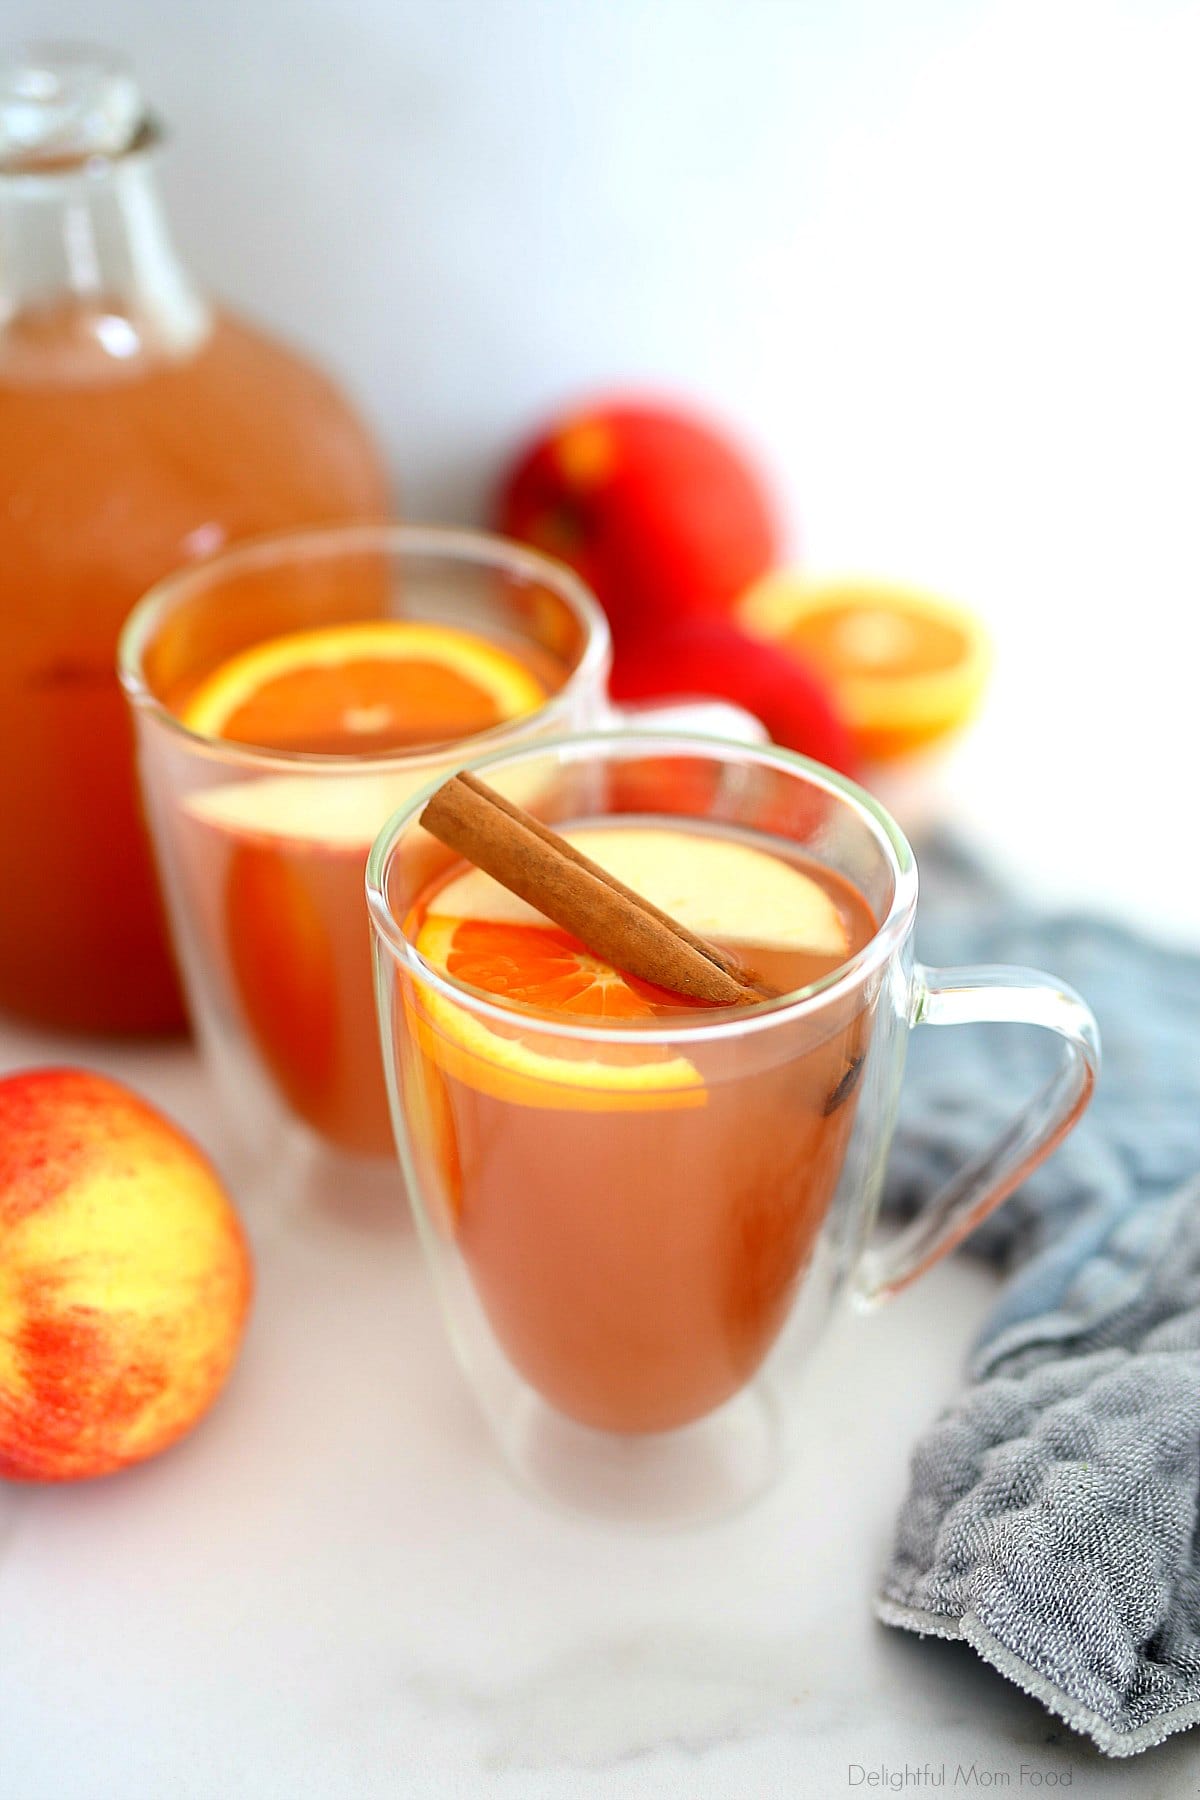 homemade apple cider recipe from scratch